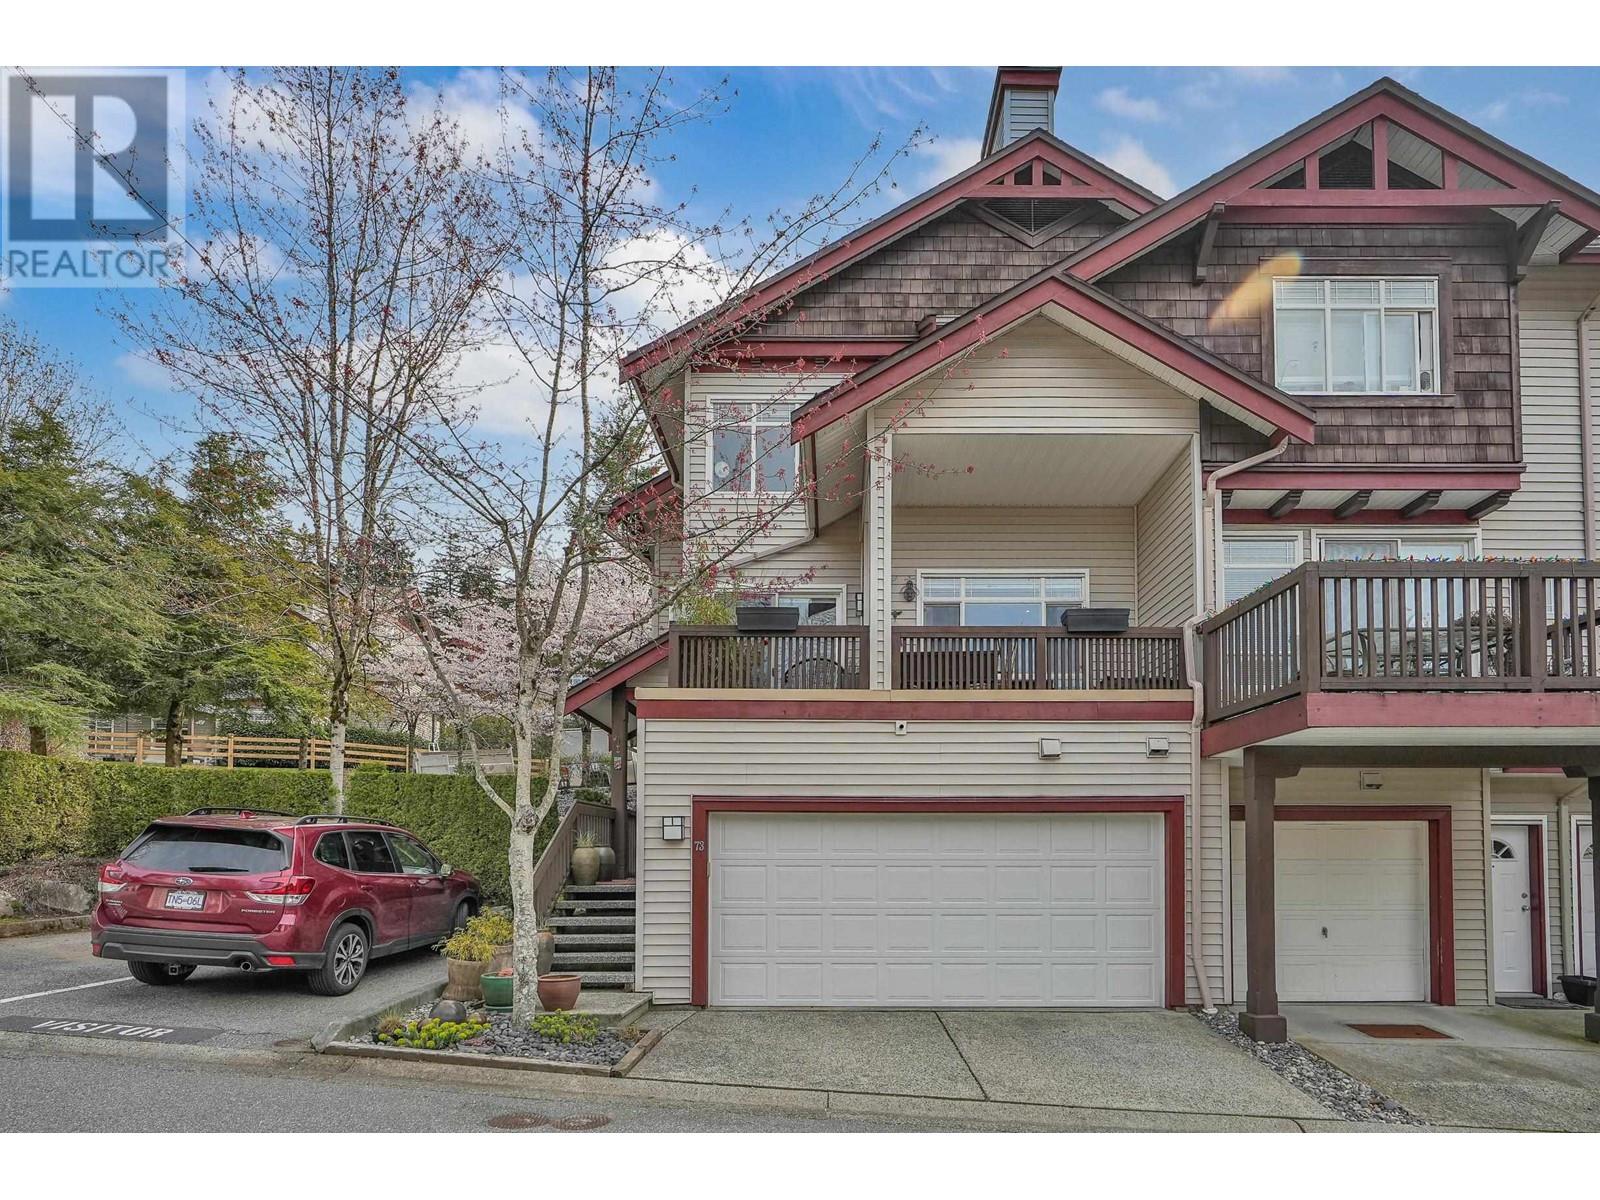 73 15 FOREST PARK WAY, port moody, British Columbia